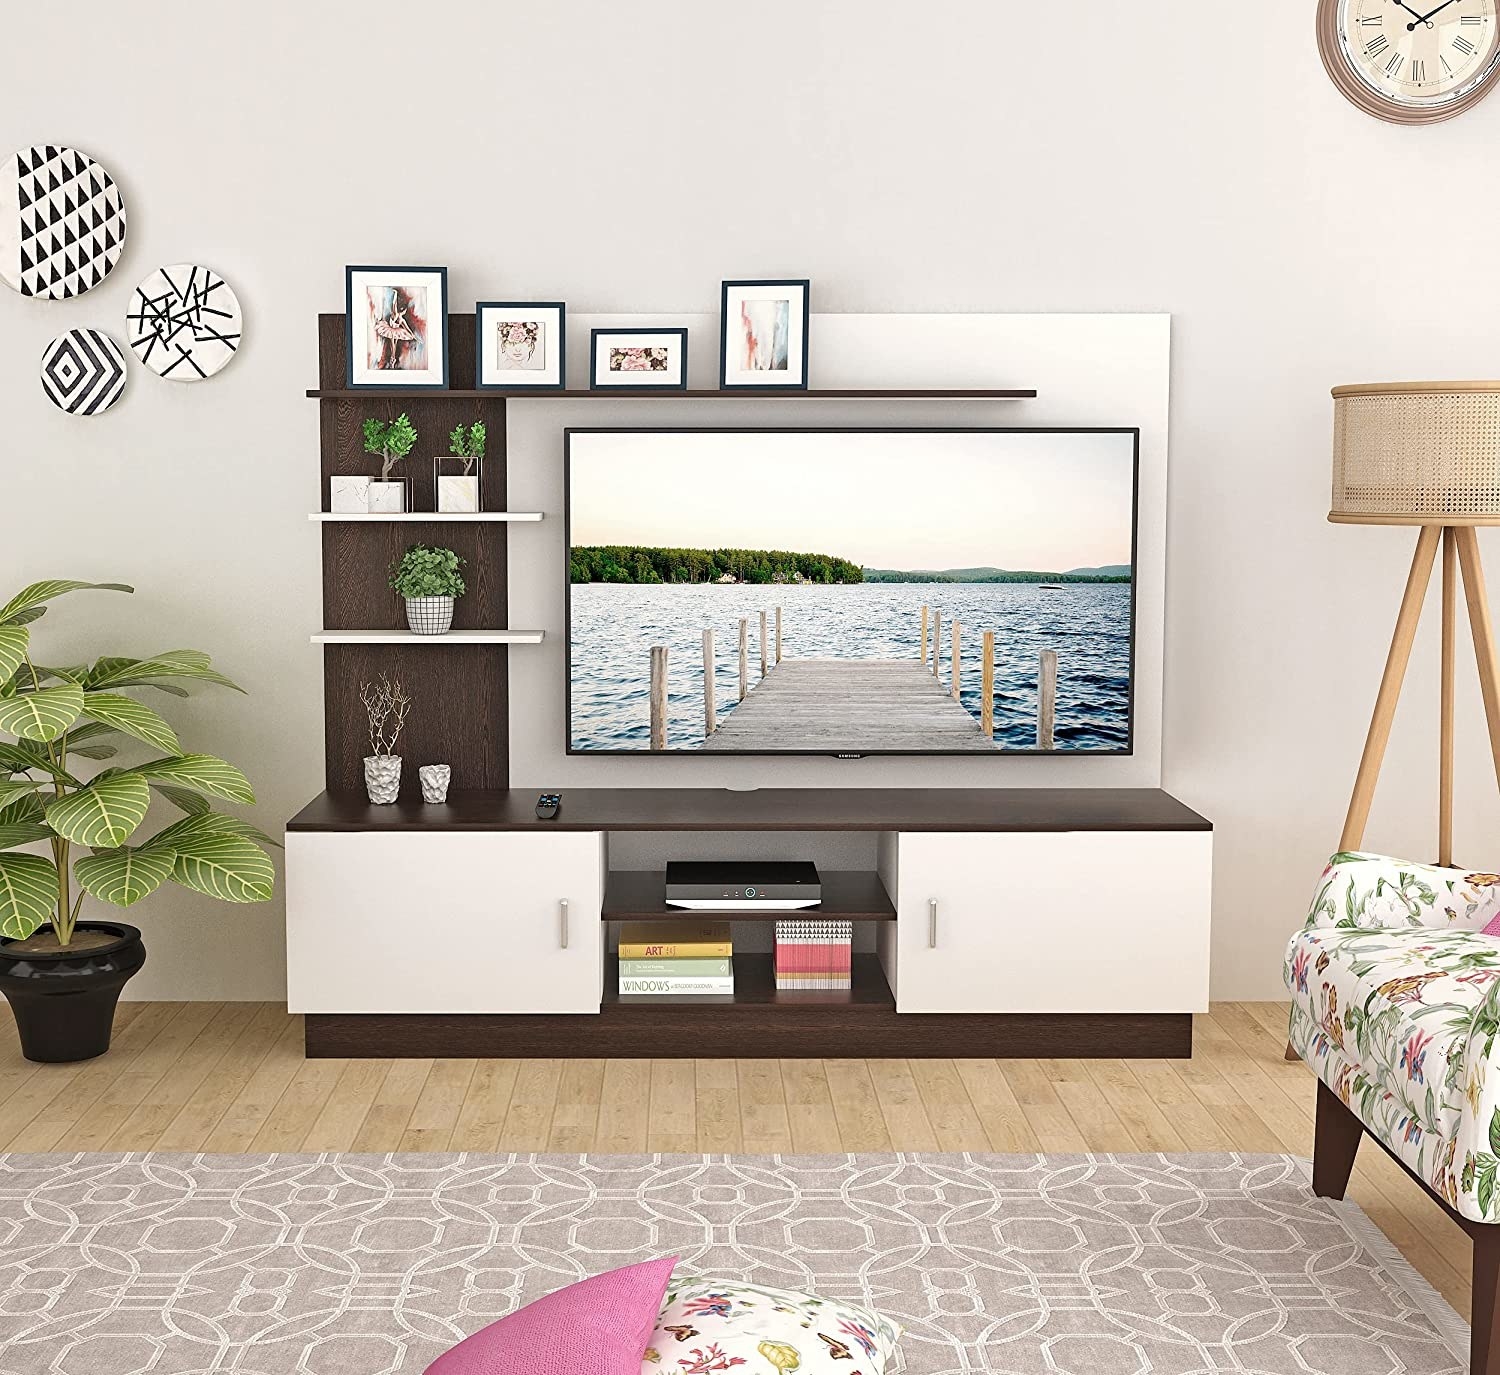 A white TV unit with a TV and other home decor items in it